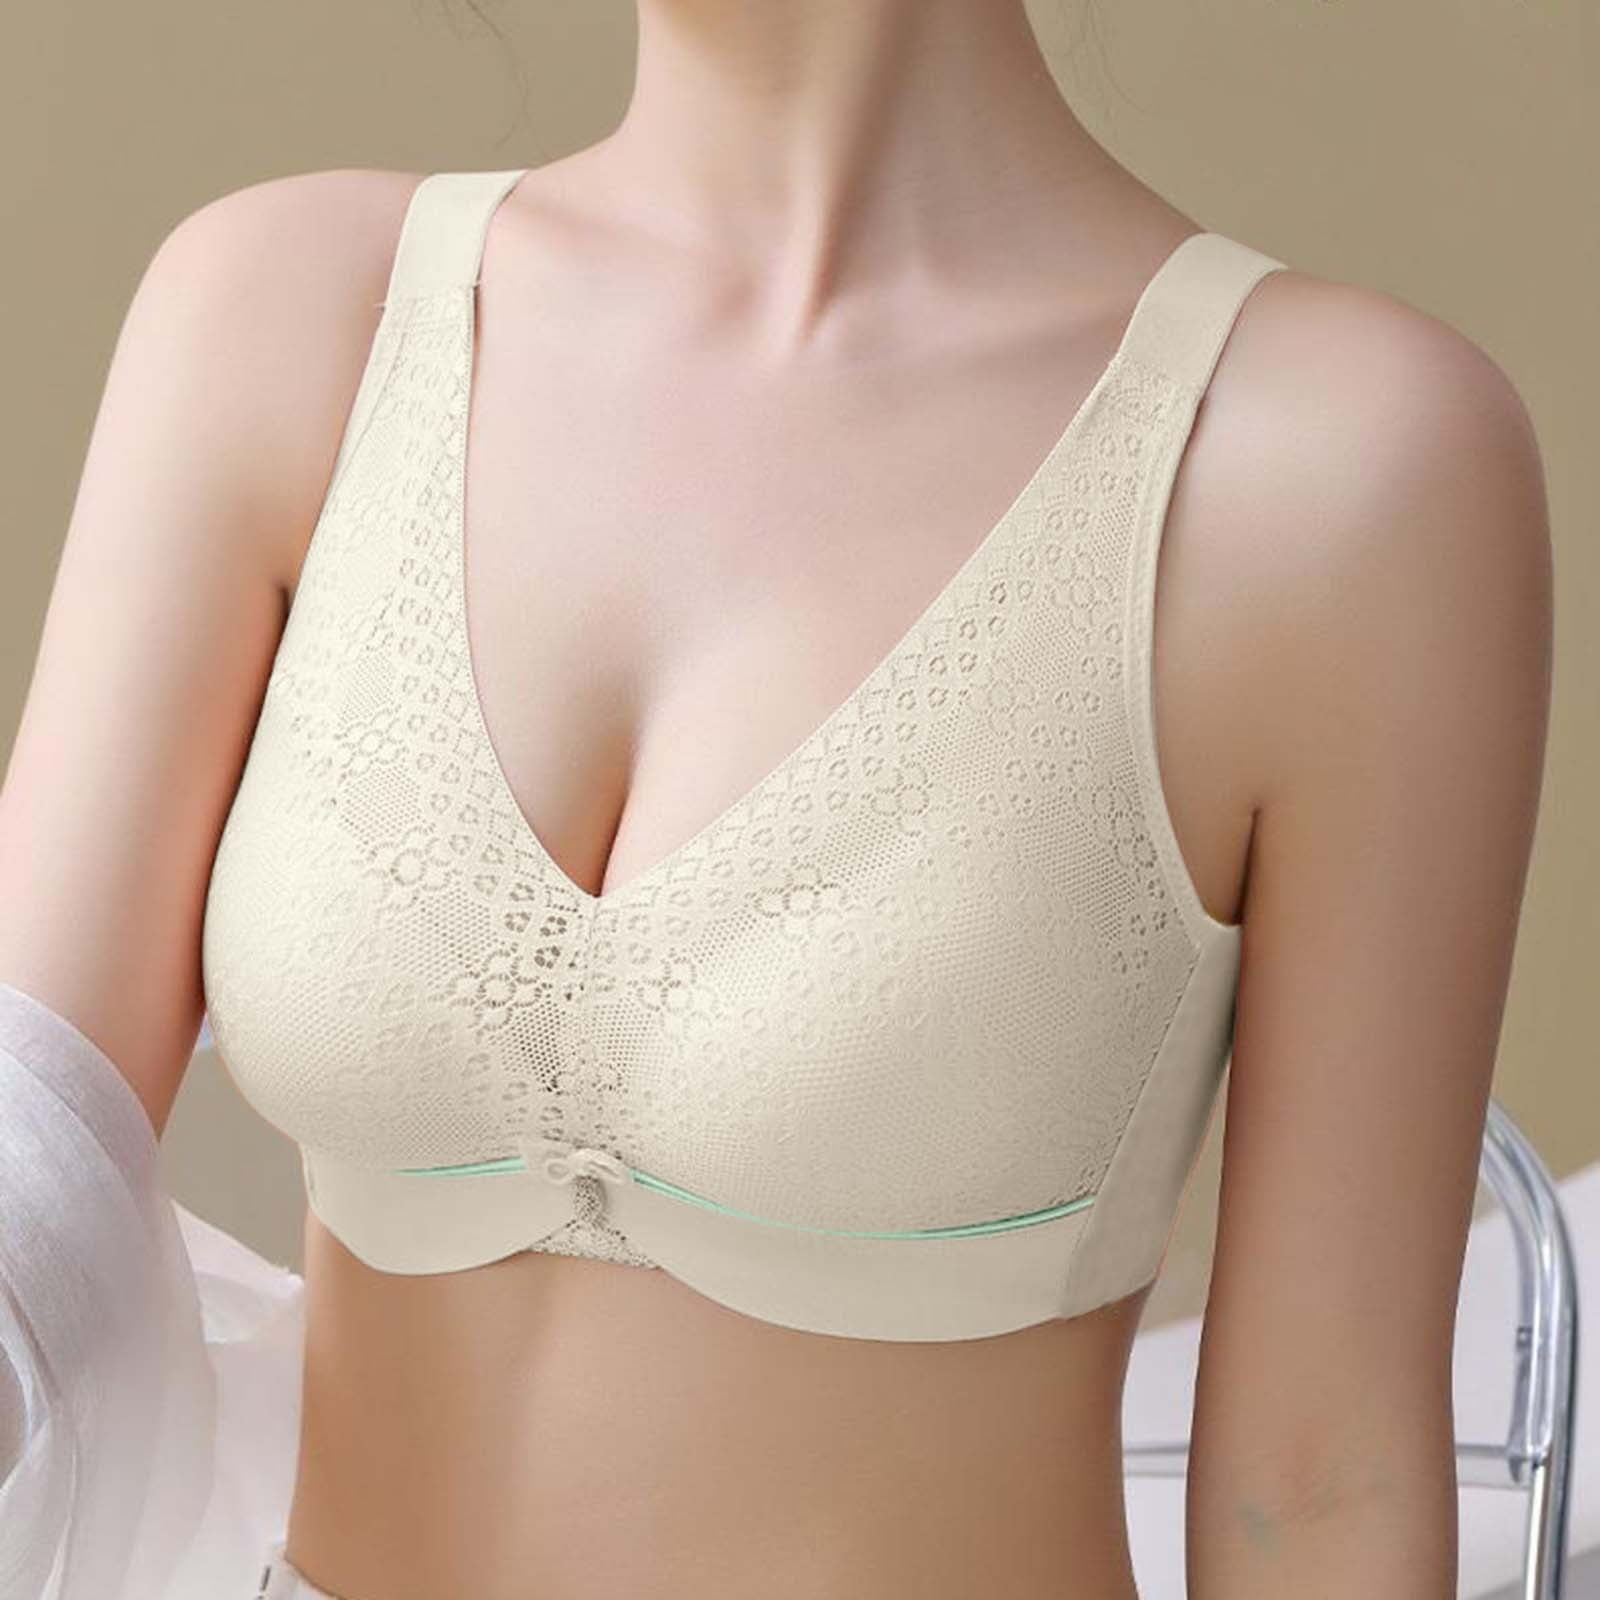 LEEy-world Lingerie for Women Lift Wireless Bra, Wirefree Bra with Support,  Full-Coverage Wireless Bra for Everyday Comfort A,XL